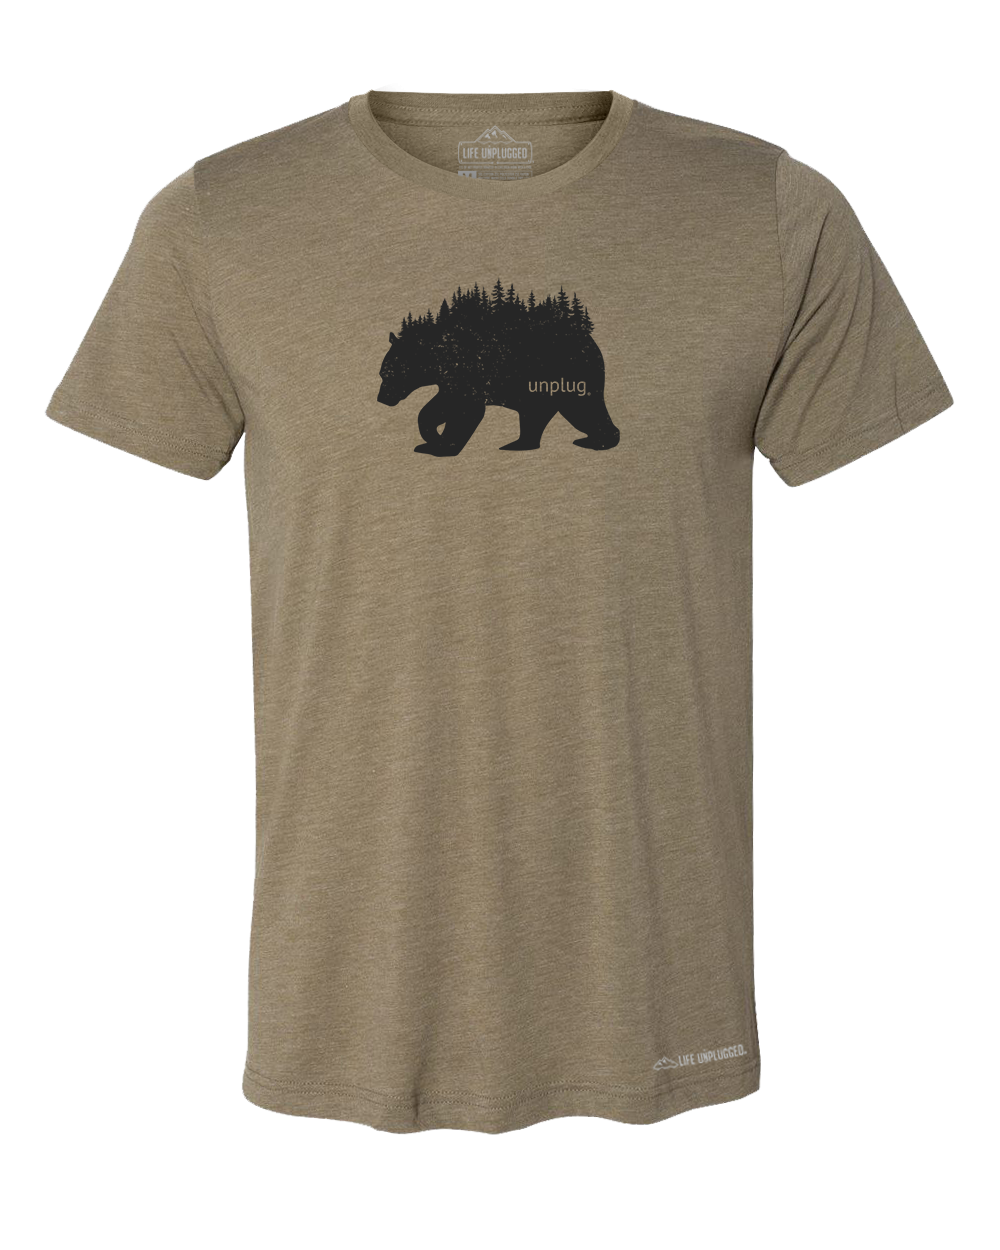 Bear In The Trees Premium Triblend T-Shirt - Life Unplugged